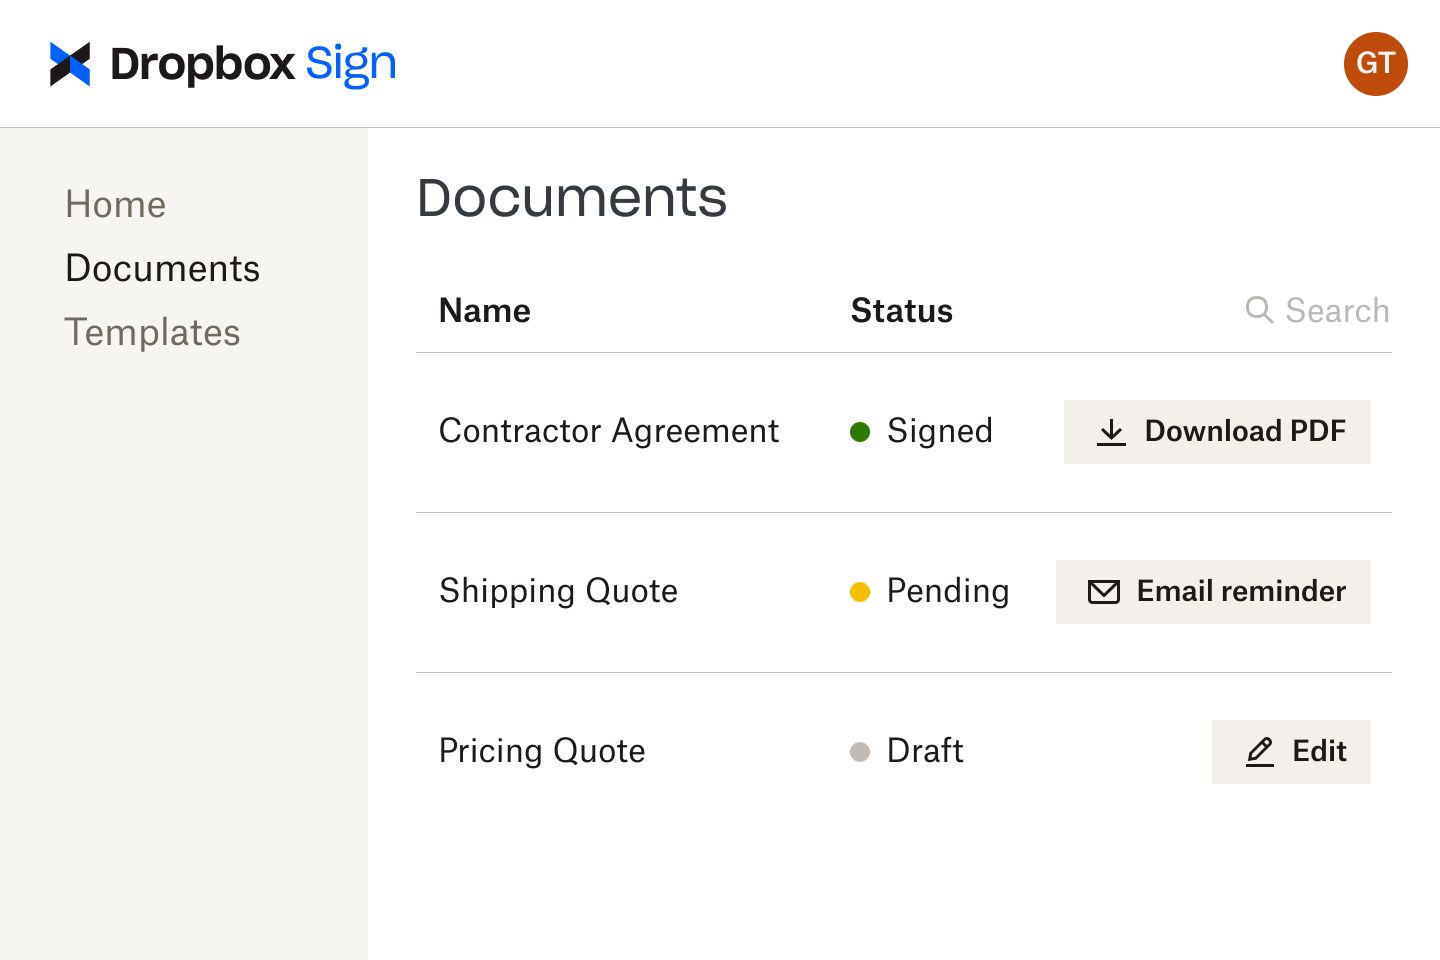 Documents in Dropbox Sign interface at various stages of review